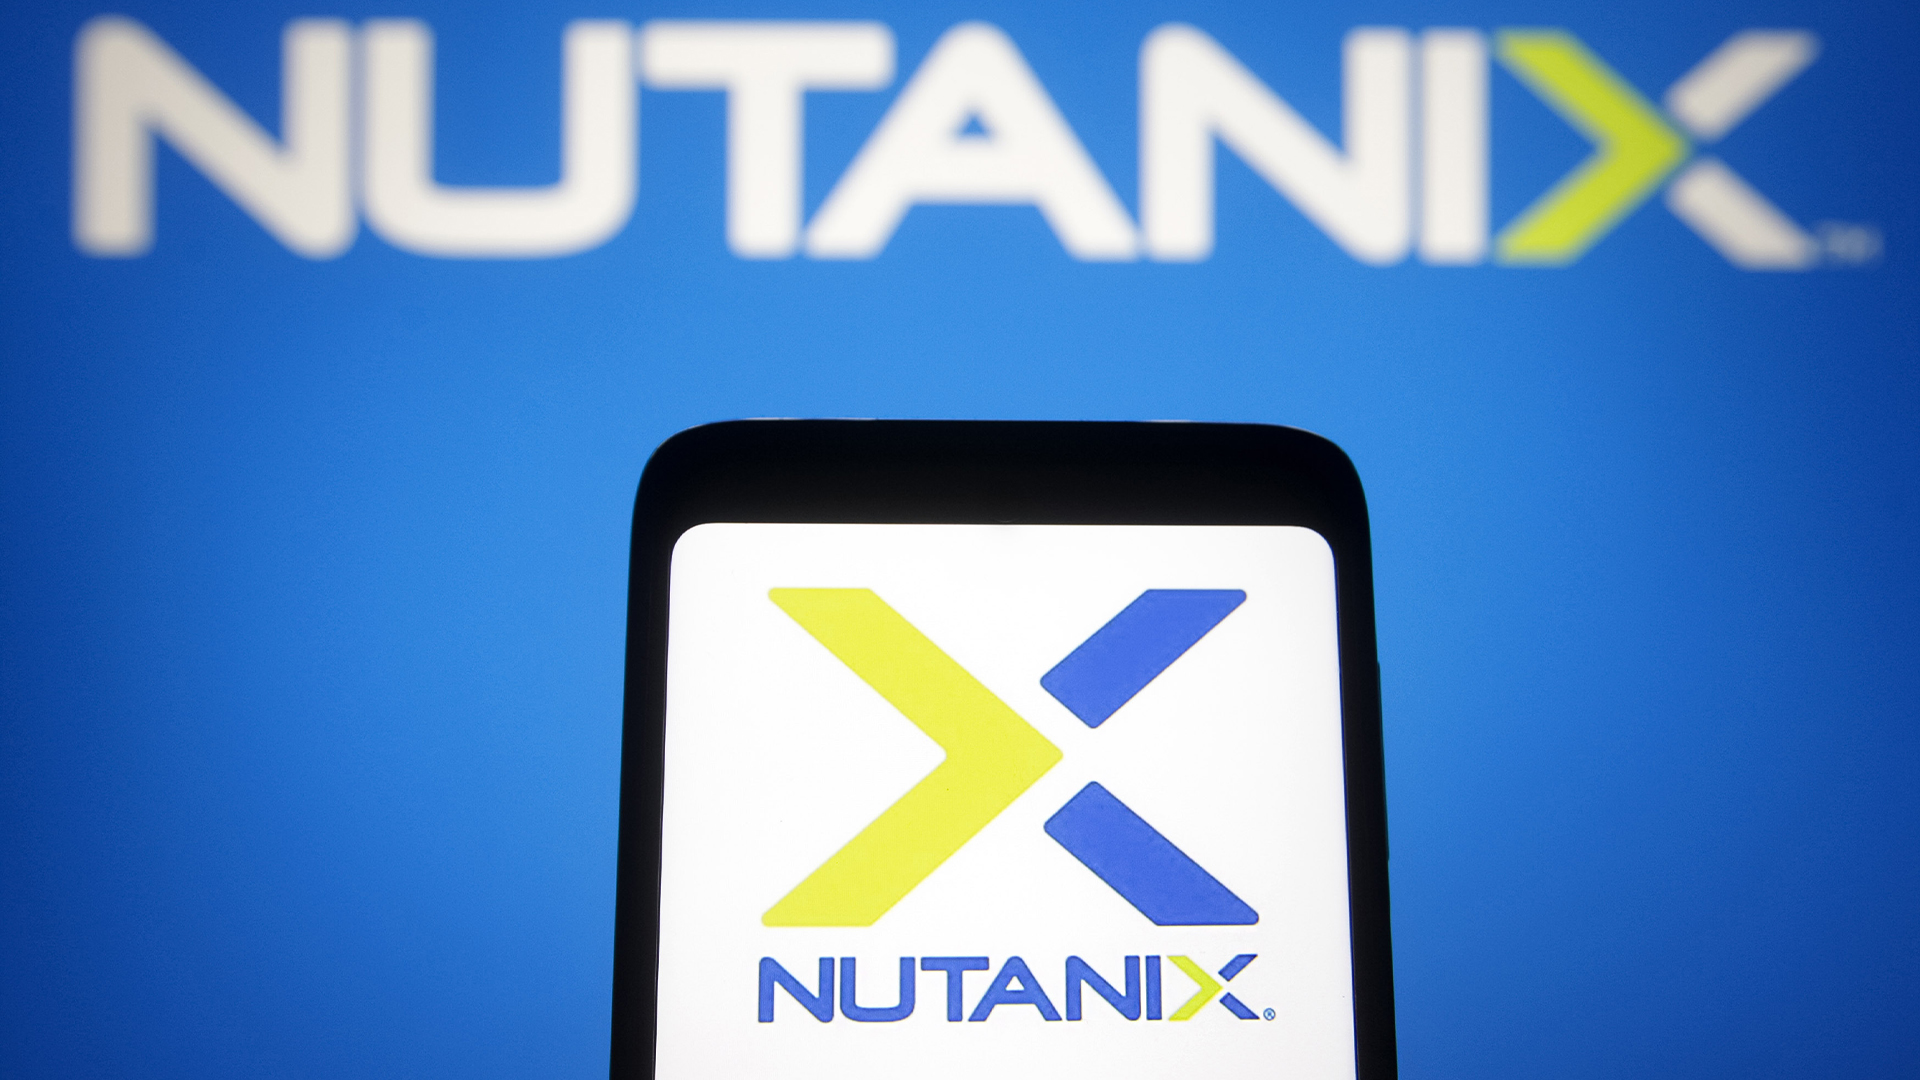 Nutanix sues Tessell for claiming founders used intellectual property to create rival products with 'strikingly similar features'